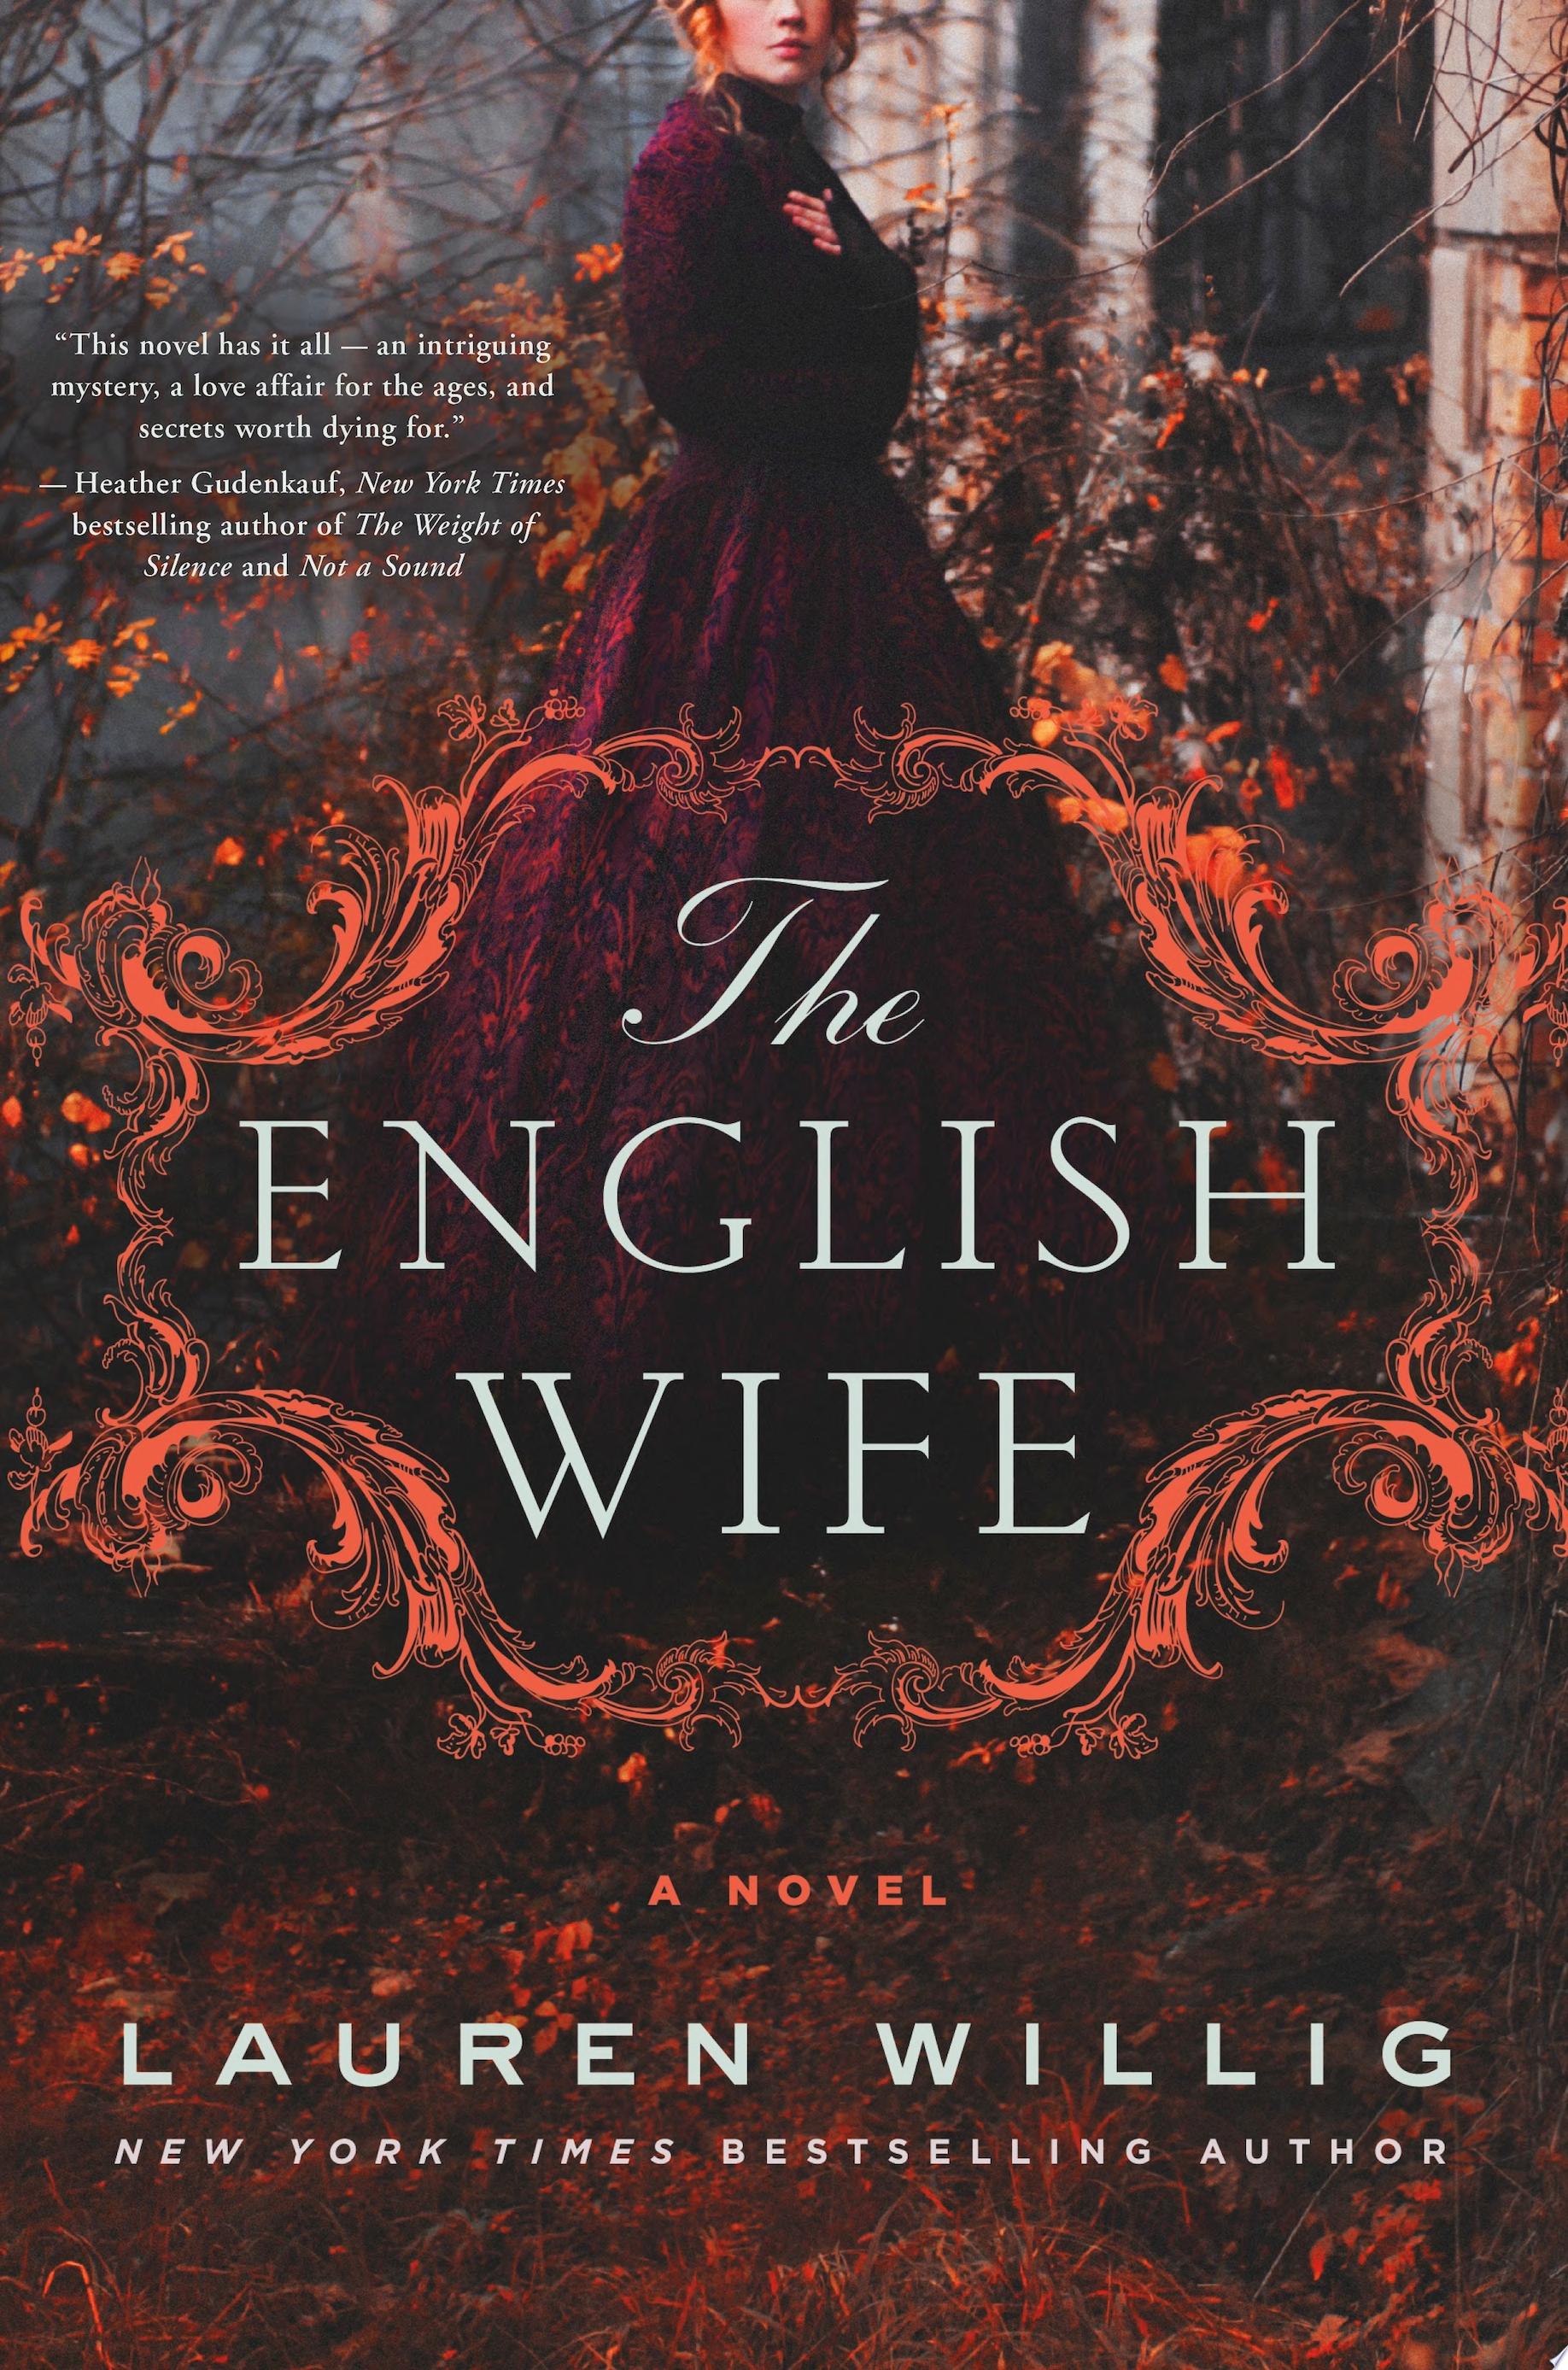 Image for "The English Wife"